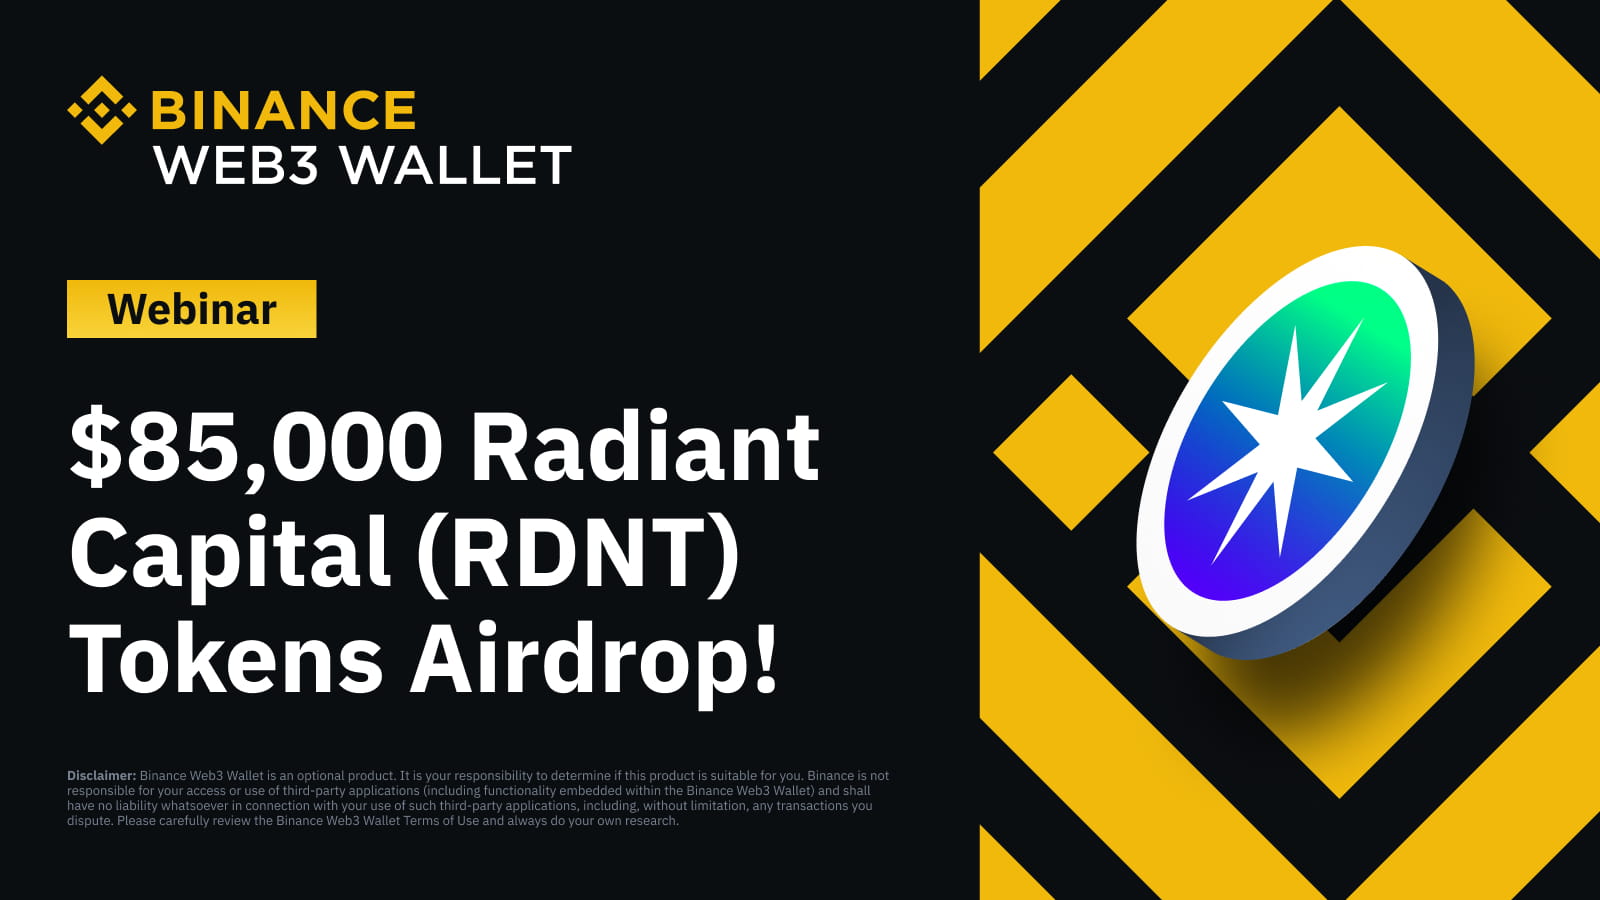 Web3 Wallet: Participate on the $85,000 RDNT Token Airdrop!